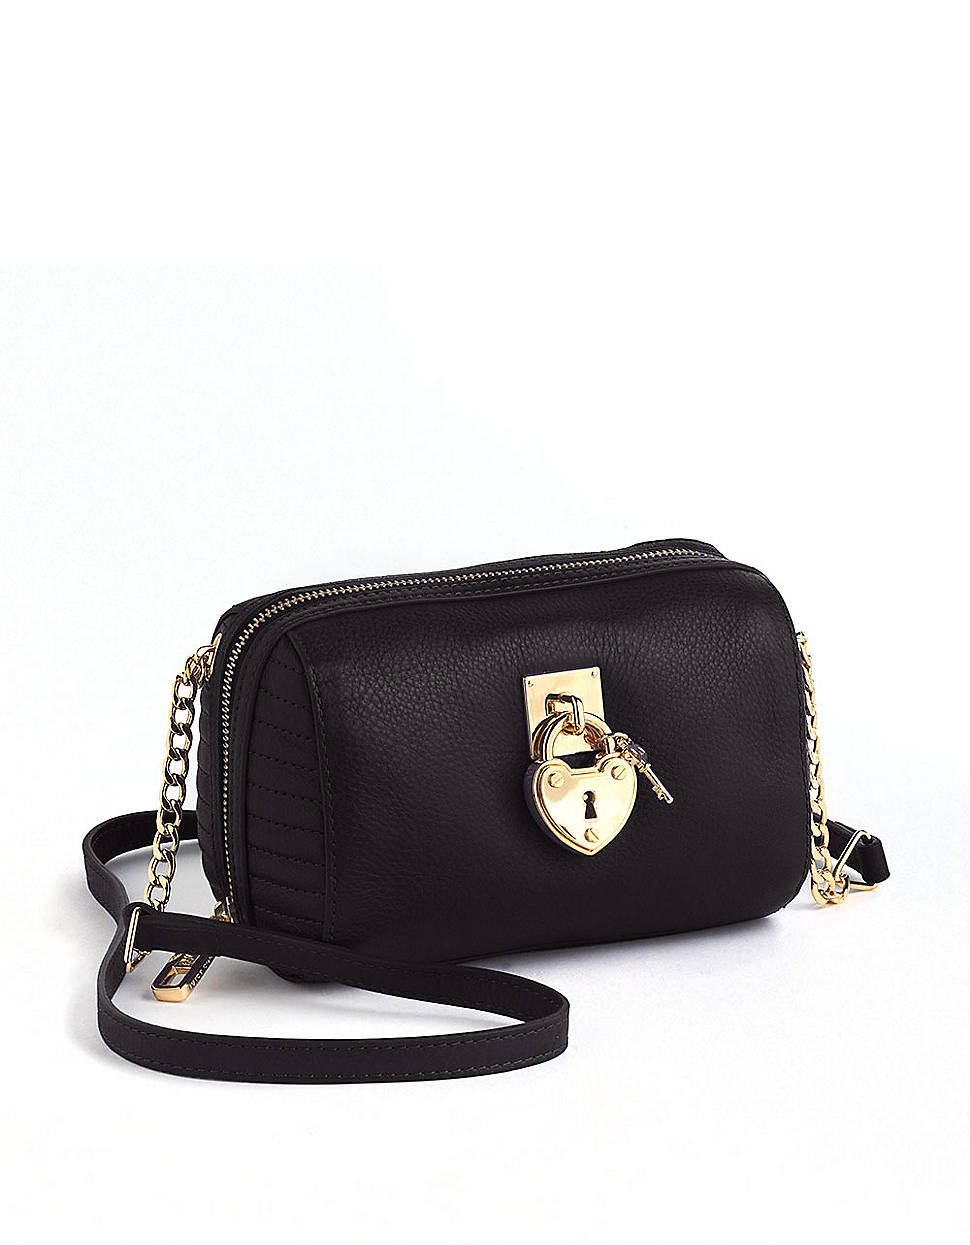 Lyst - Juicy Couture Mini Steffy Leather Crossbody Bag in Black